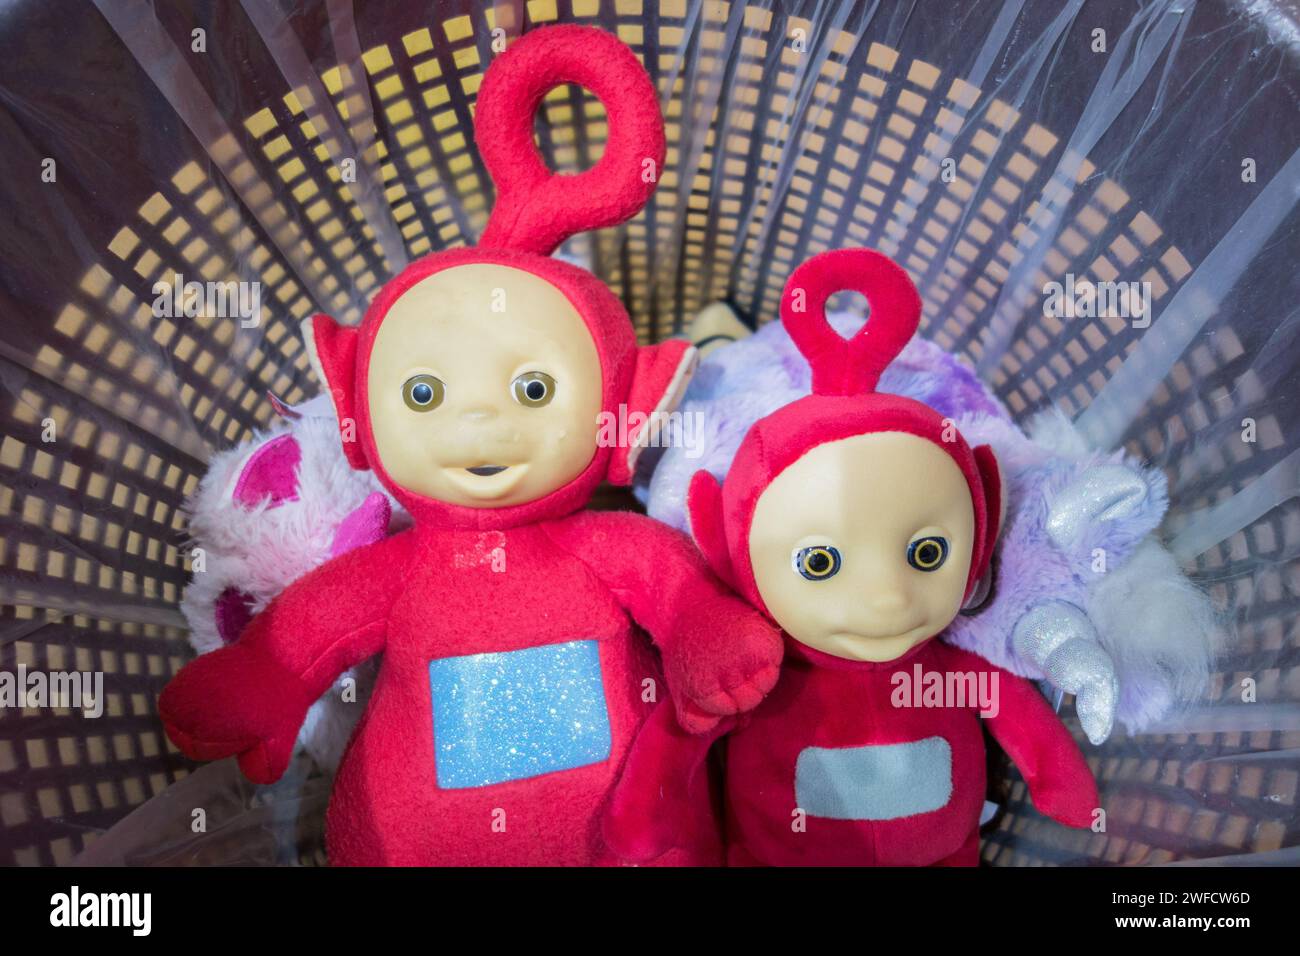 Close up of Po the red Teletubby with circle-shaped antenna in a basket Stock Photo